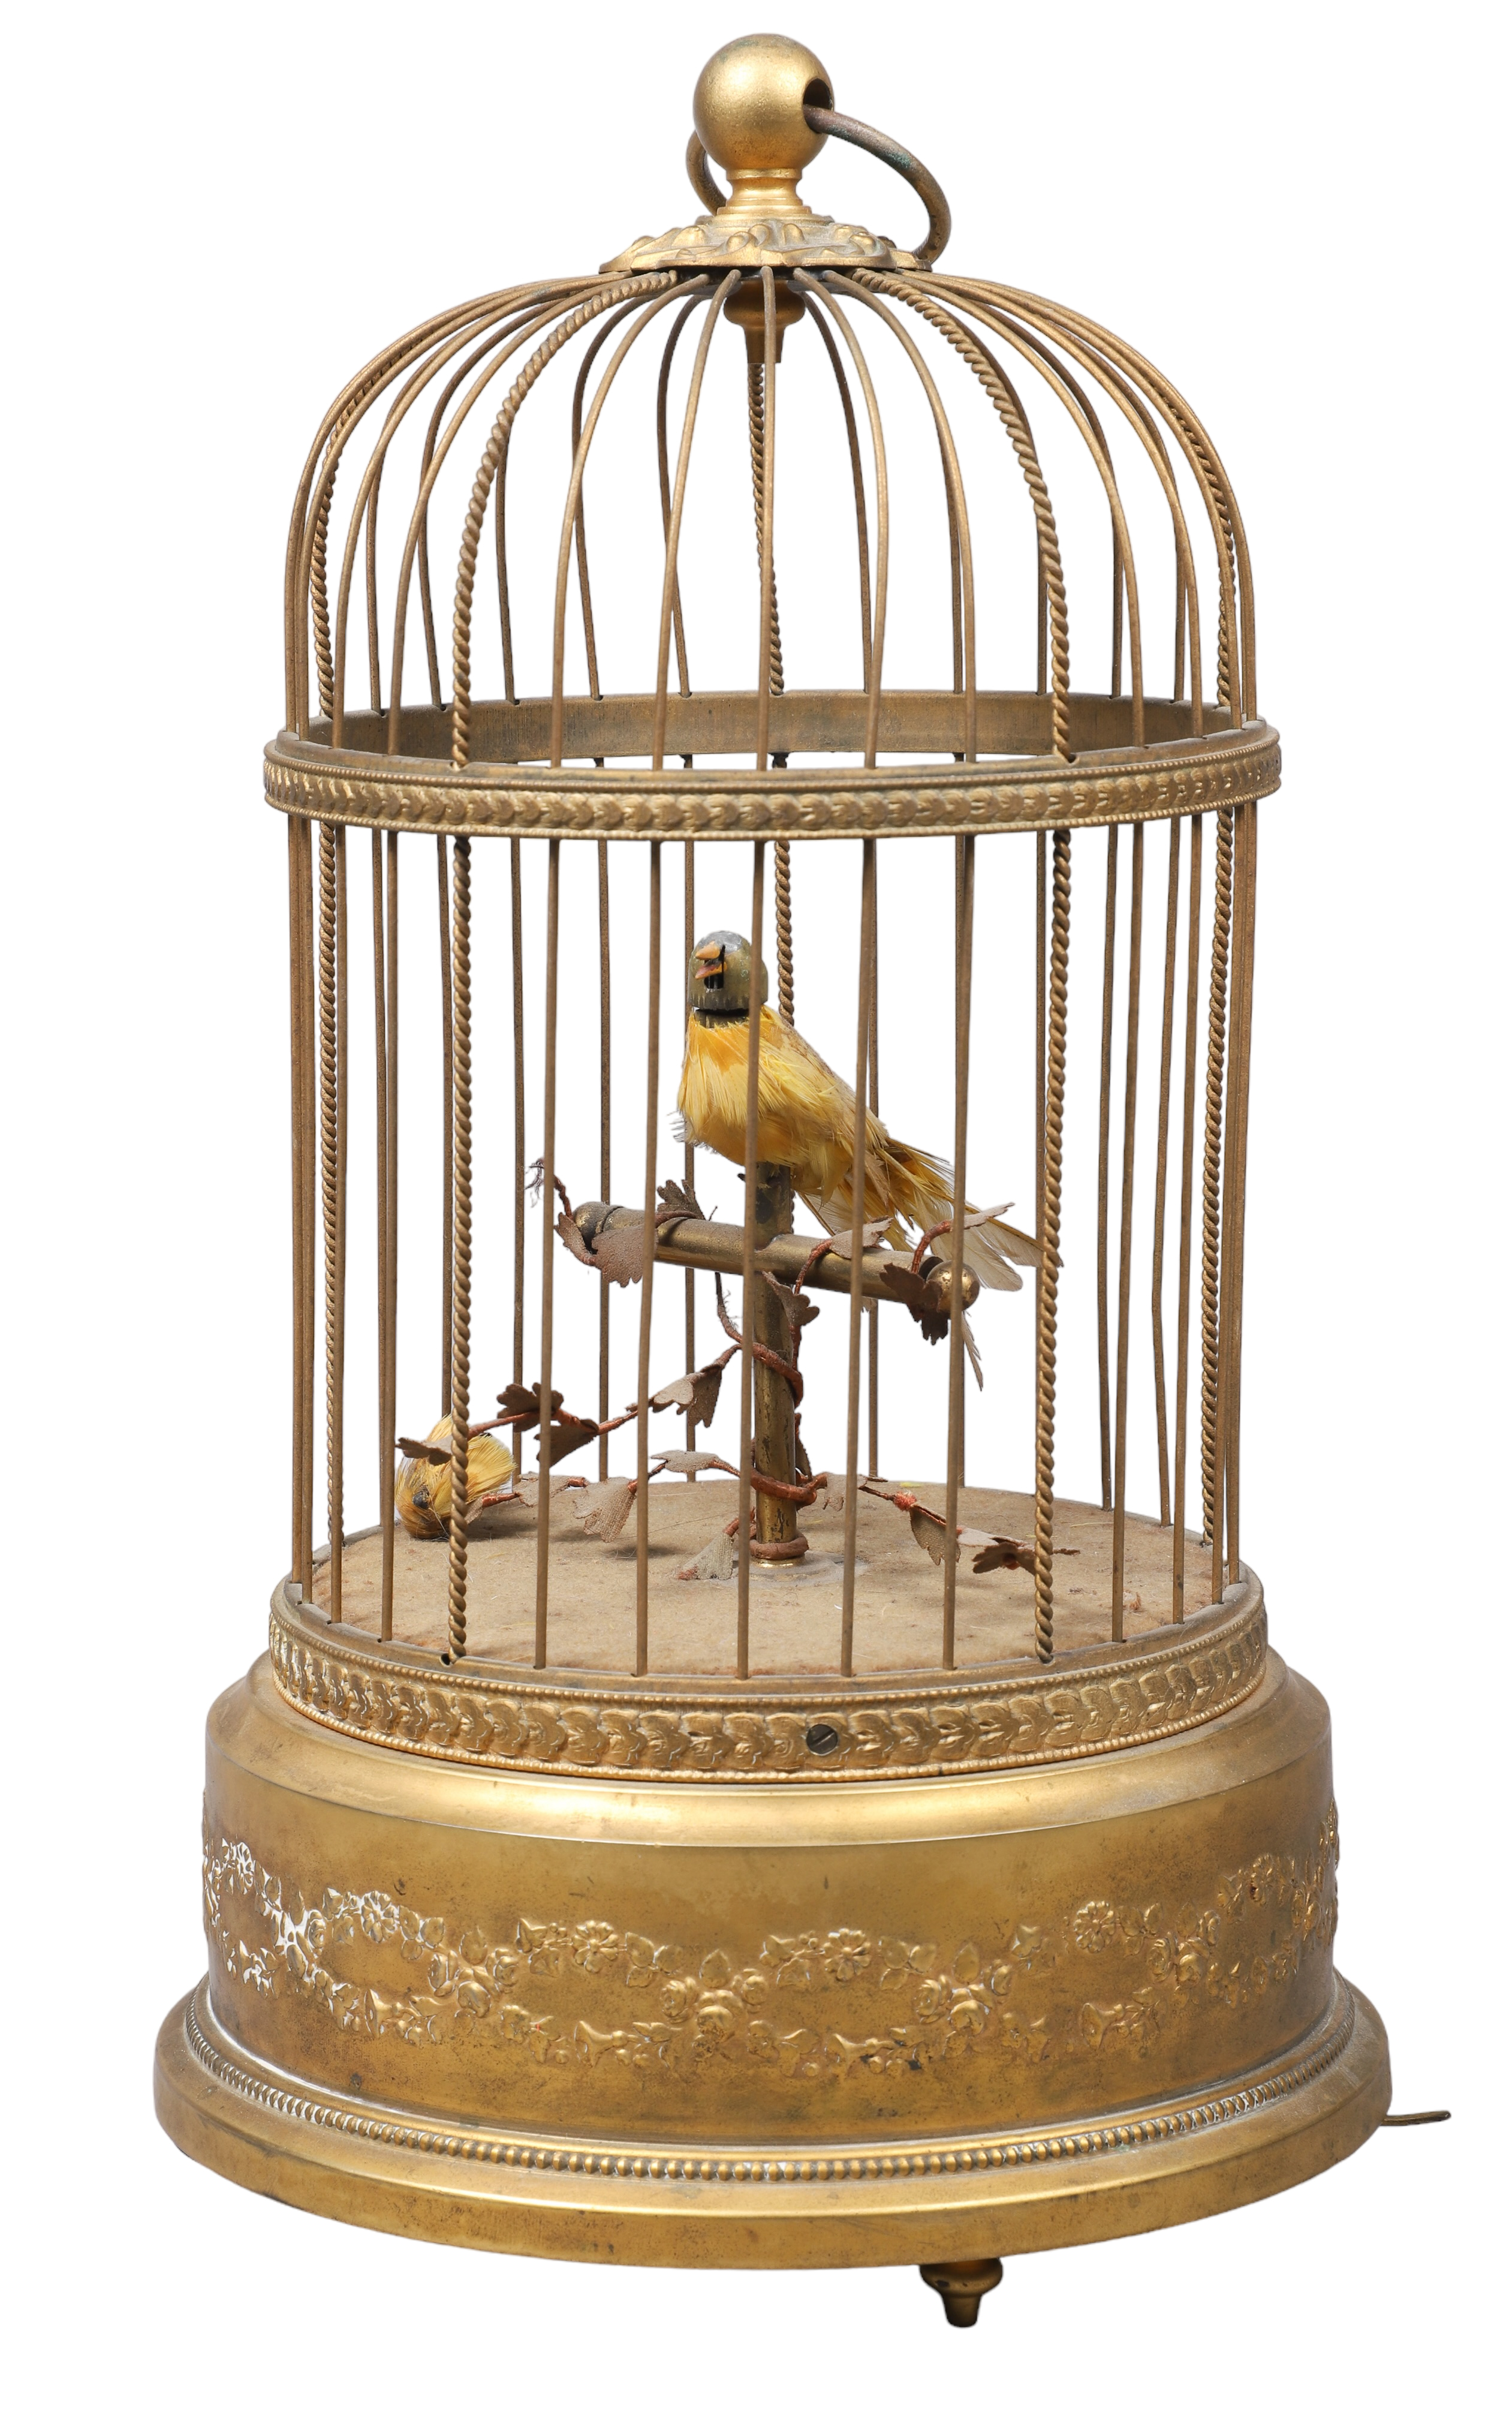 Automaton bird in gilded cage, marked